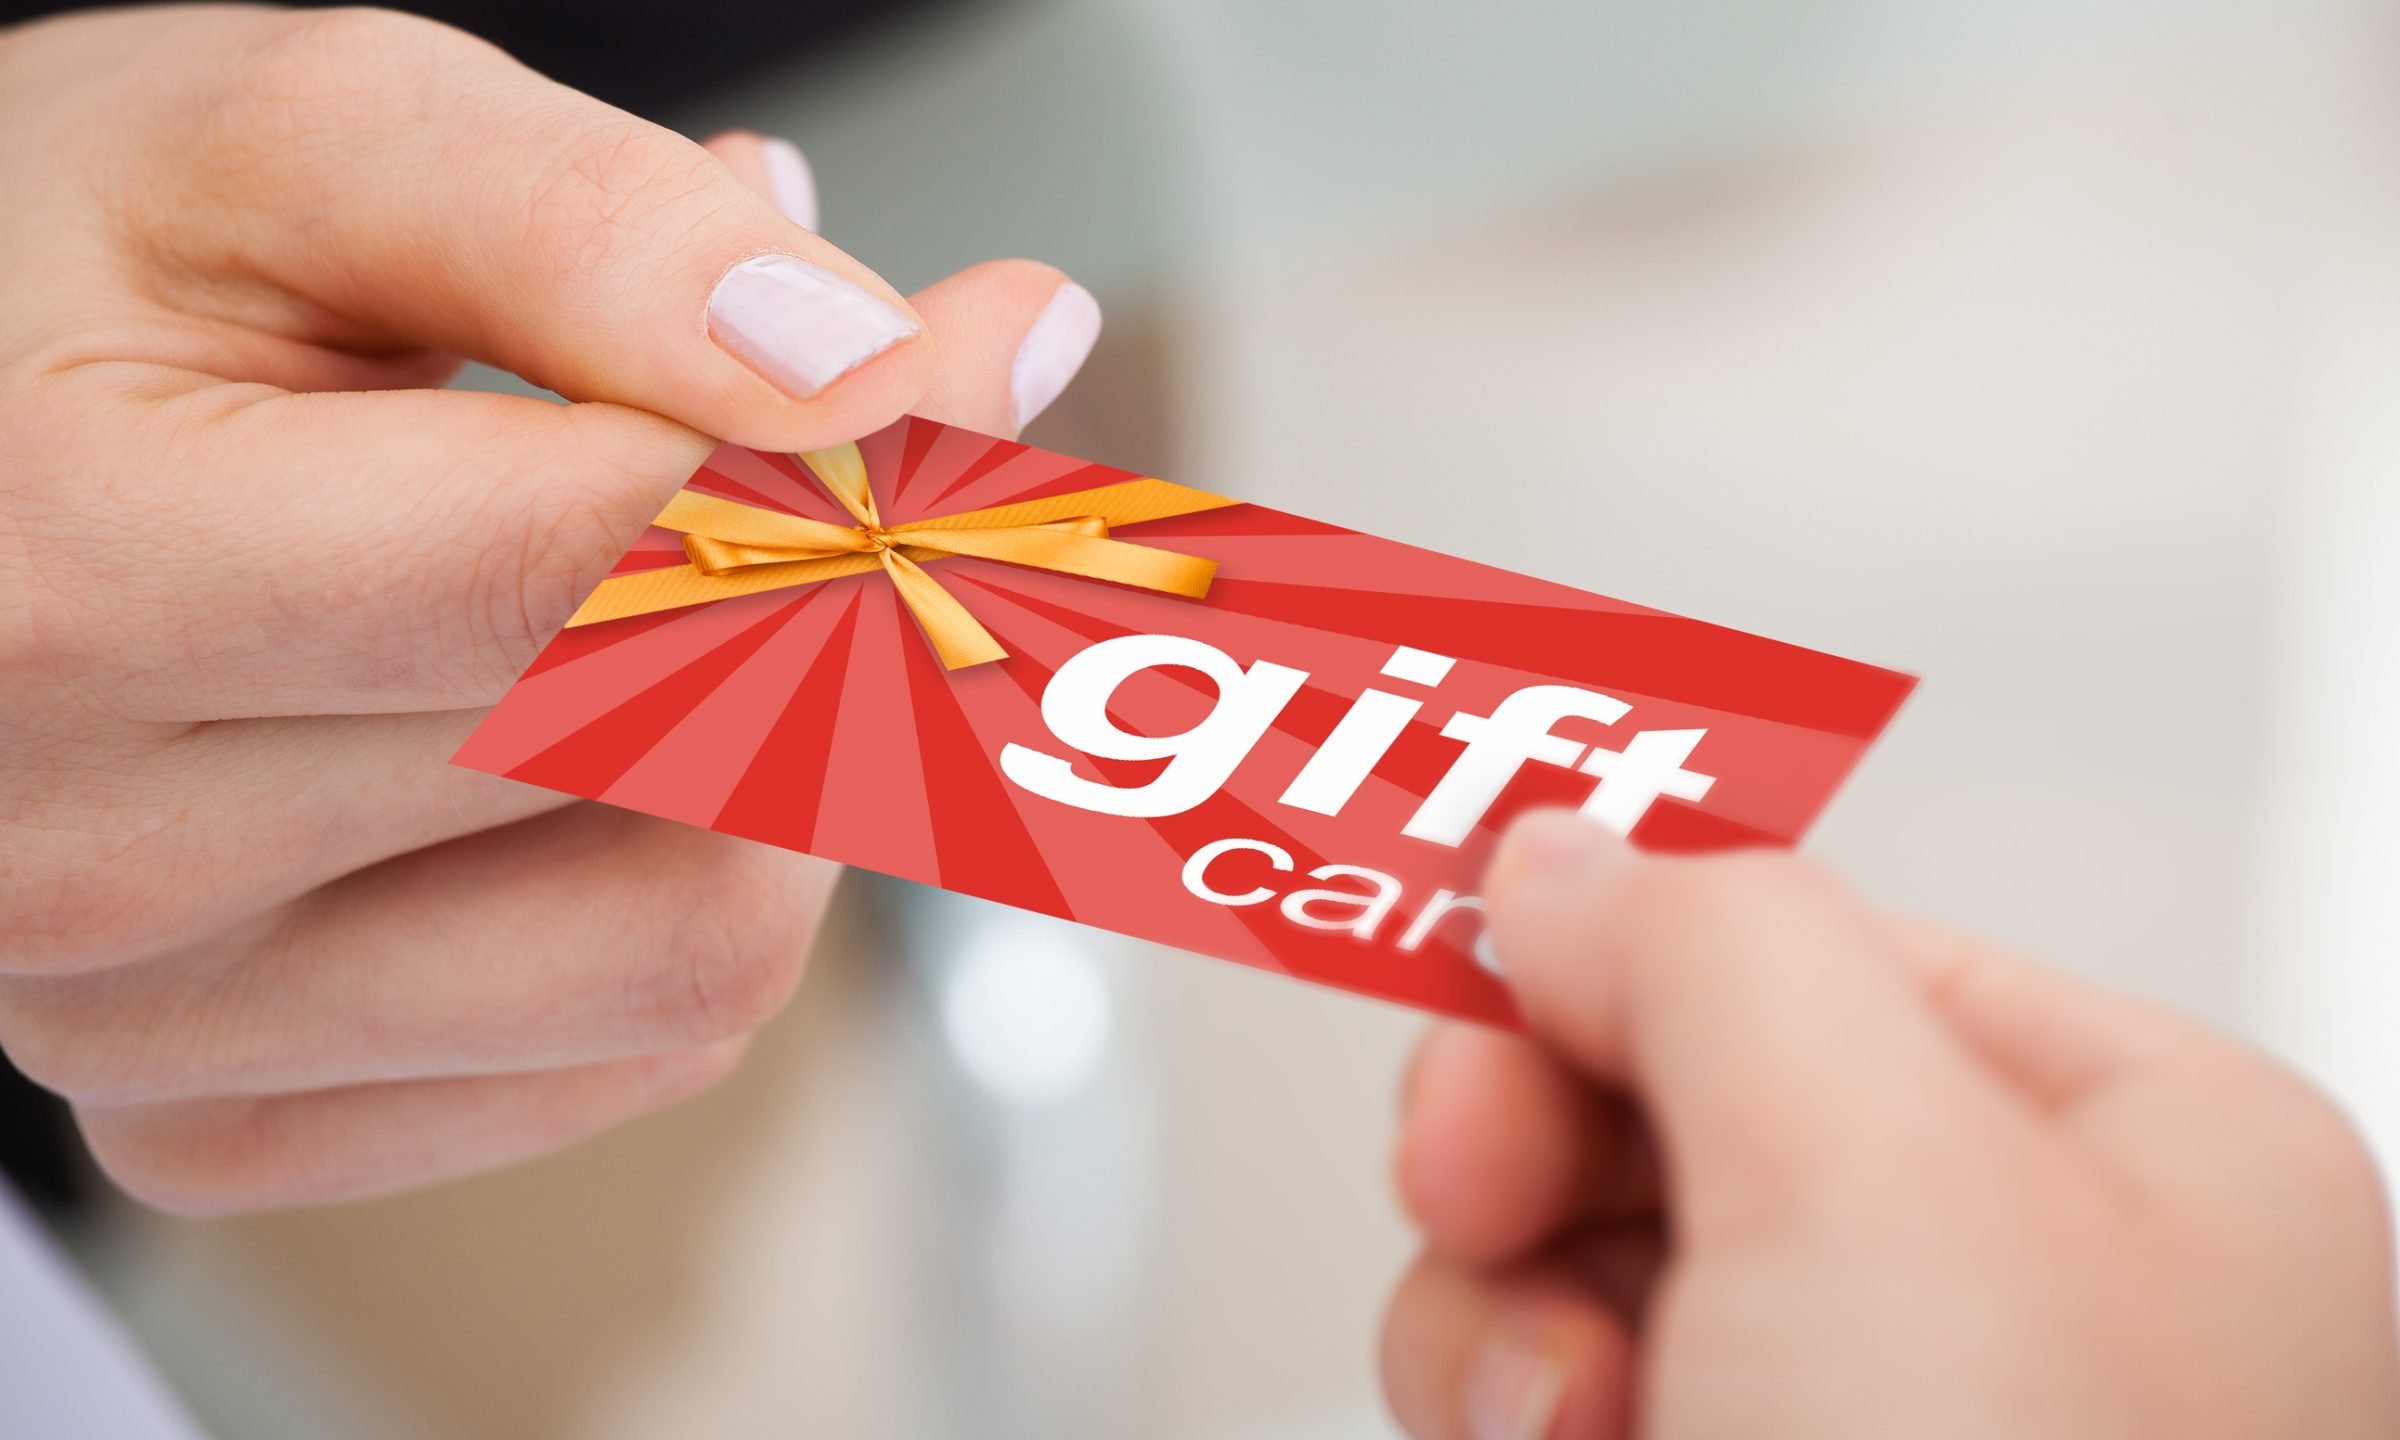 Scammers prefer gift cards, but not just any card will do | Federal Trade Commission